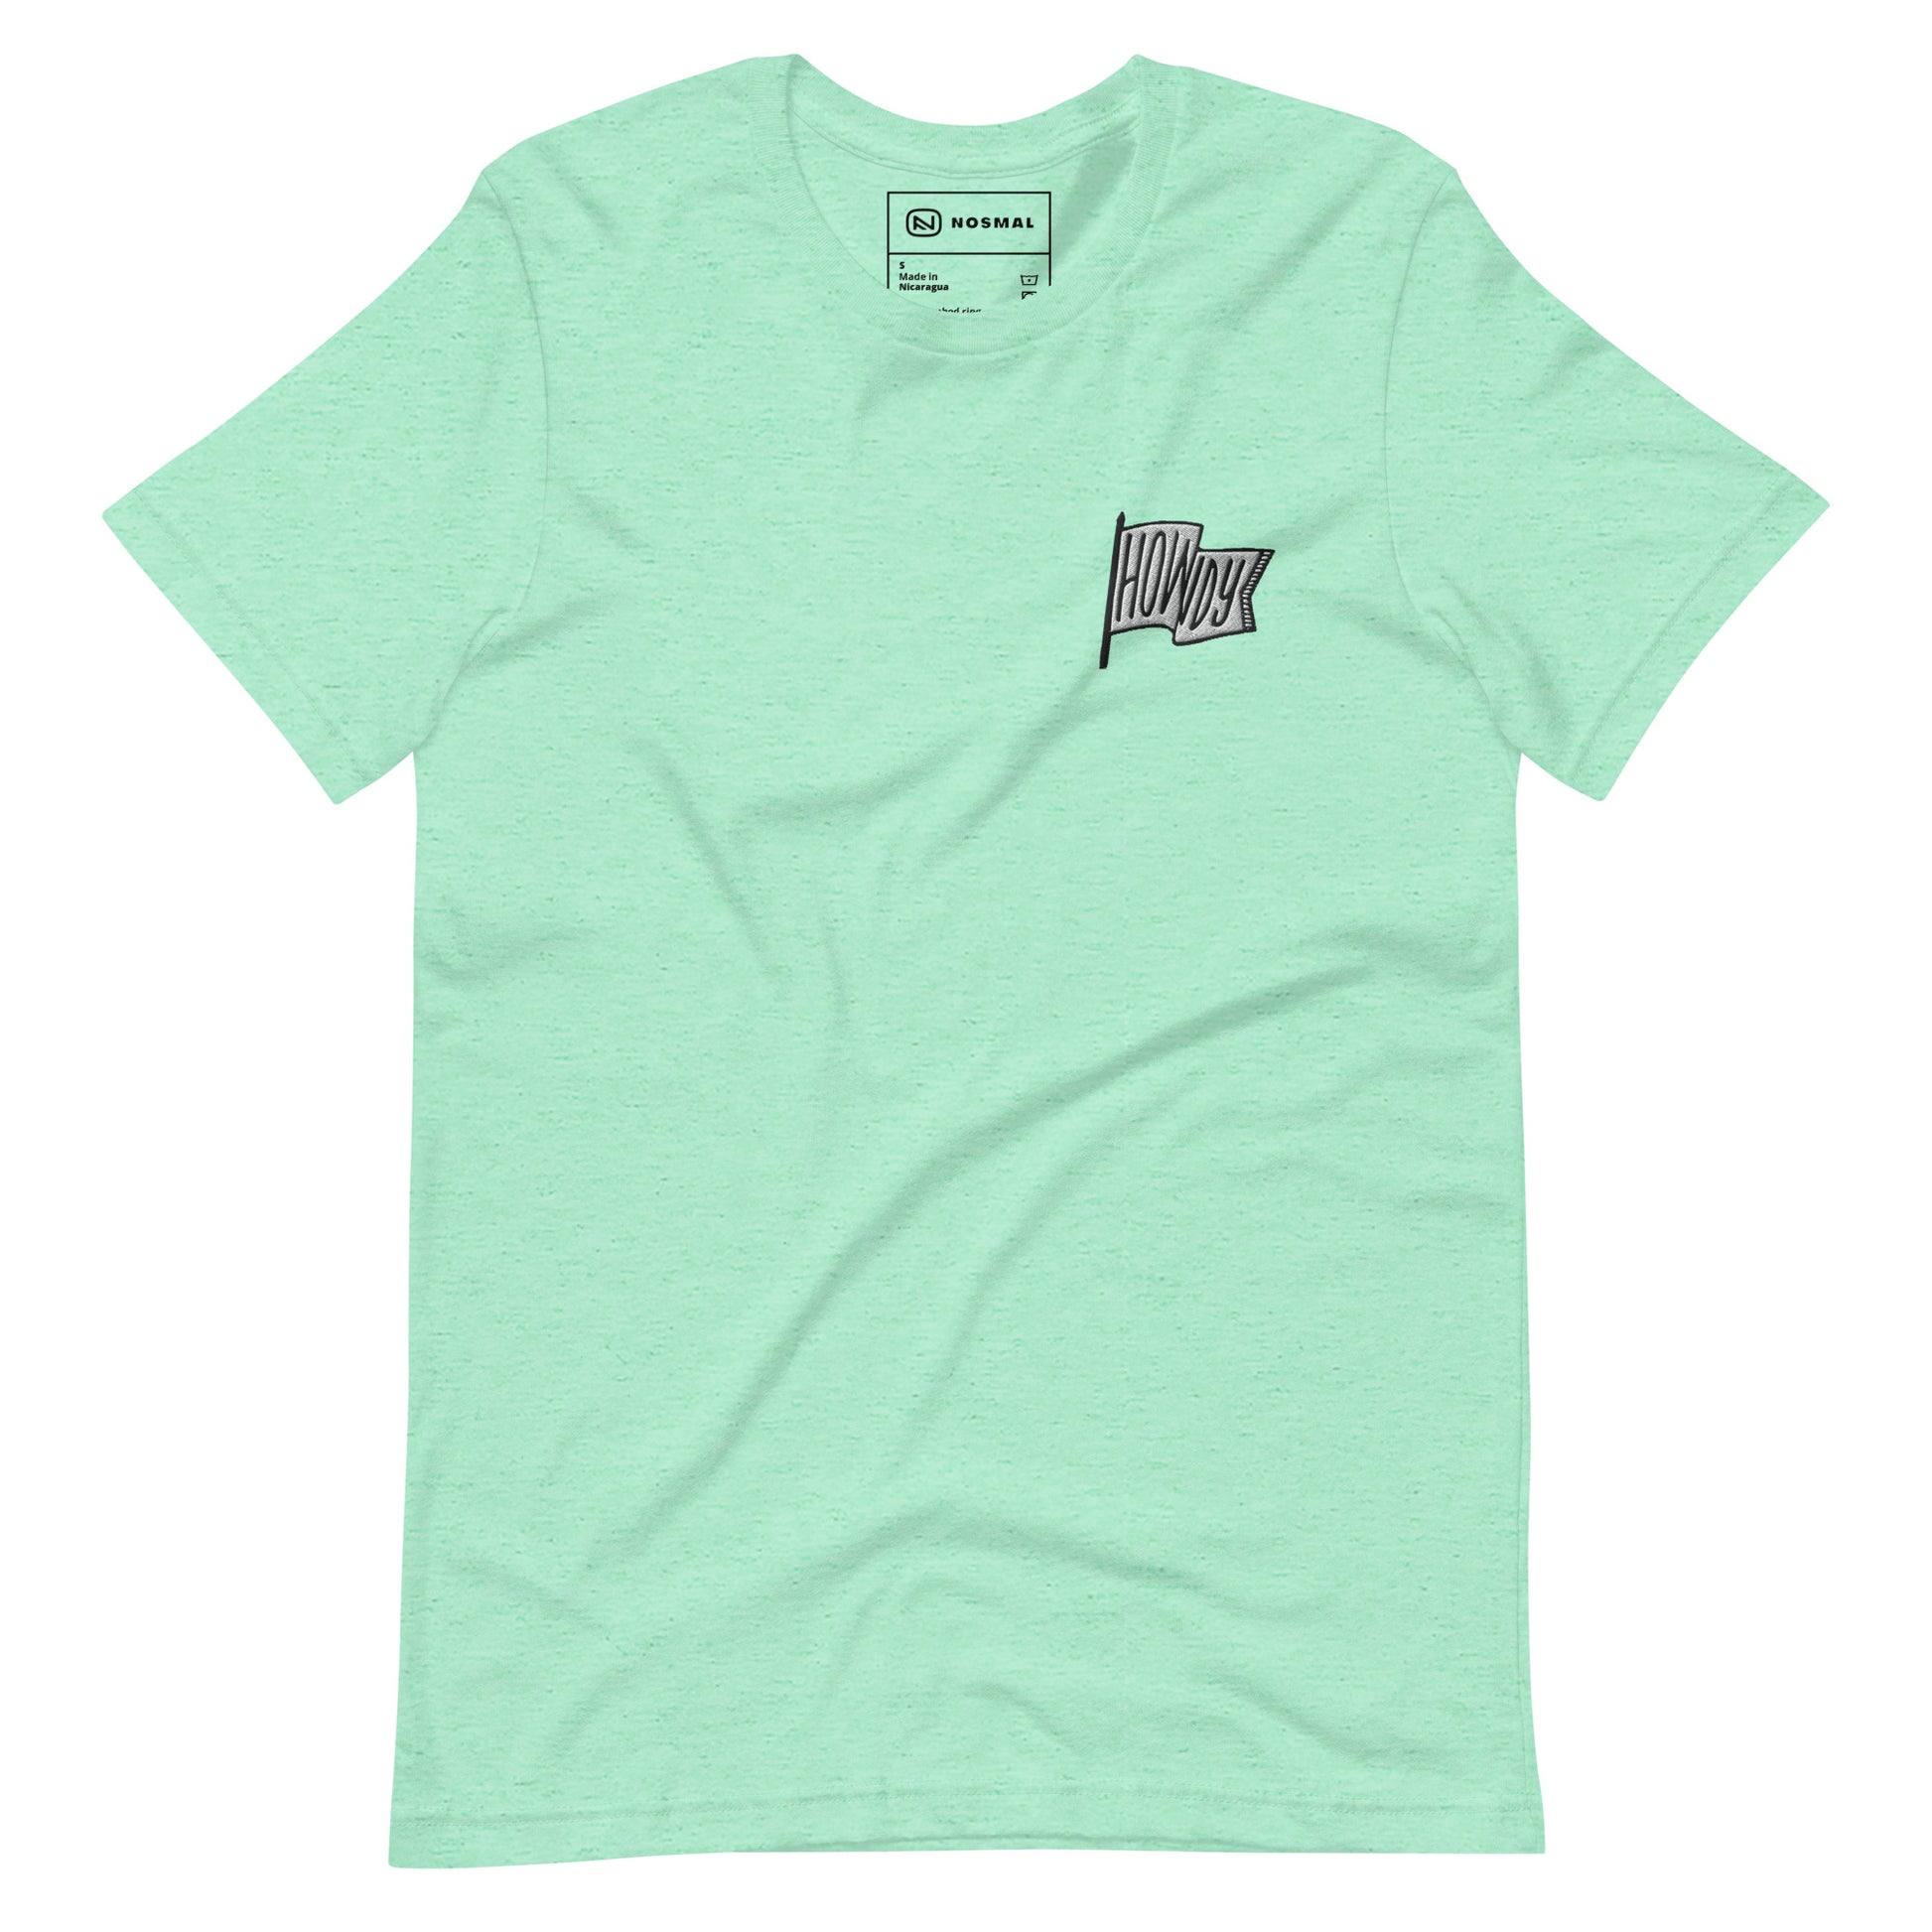 Straight on view of howdy embroidered design on heather mint unisex t-shirt.